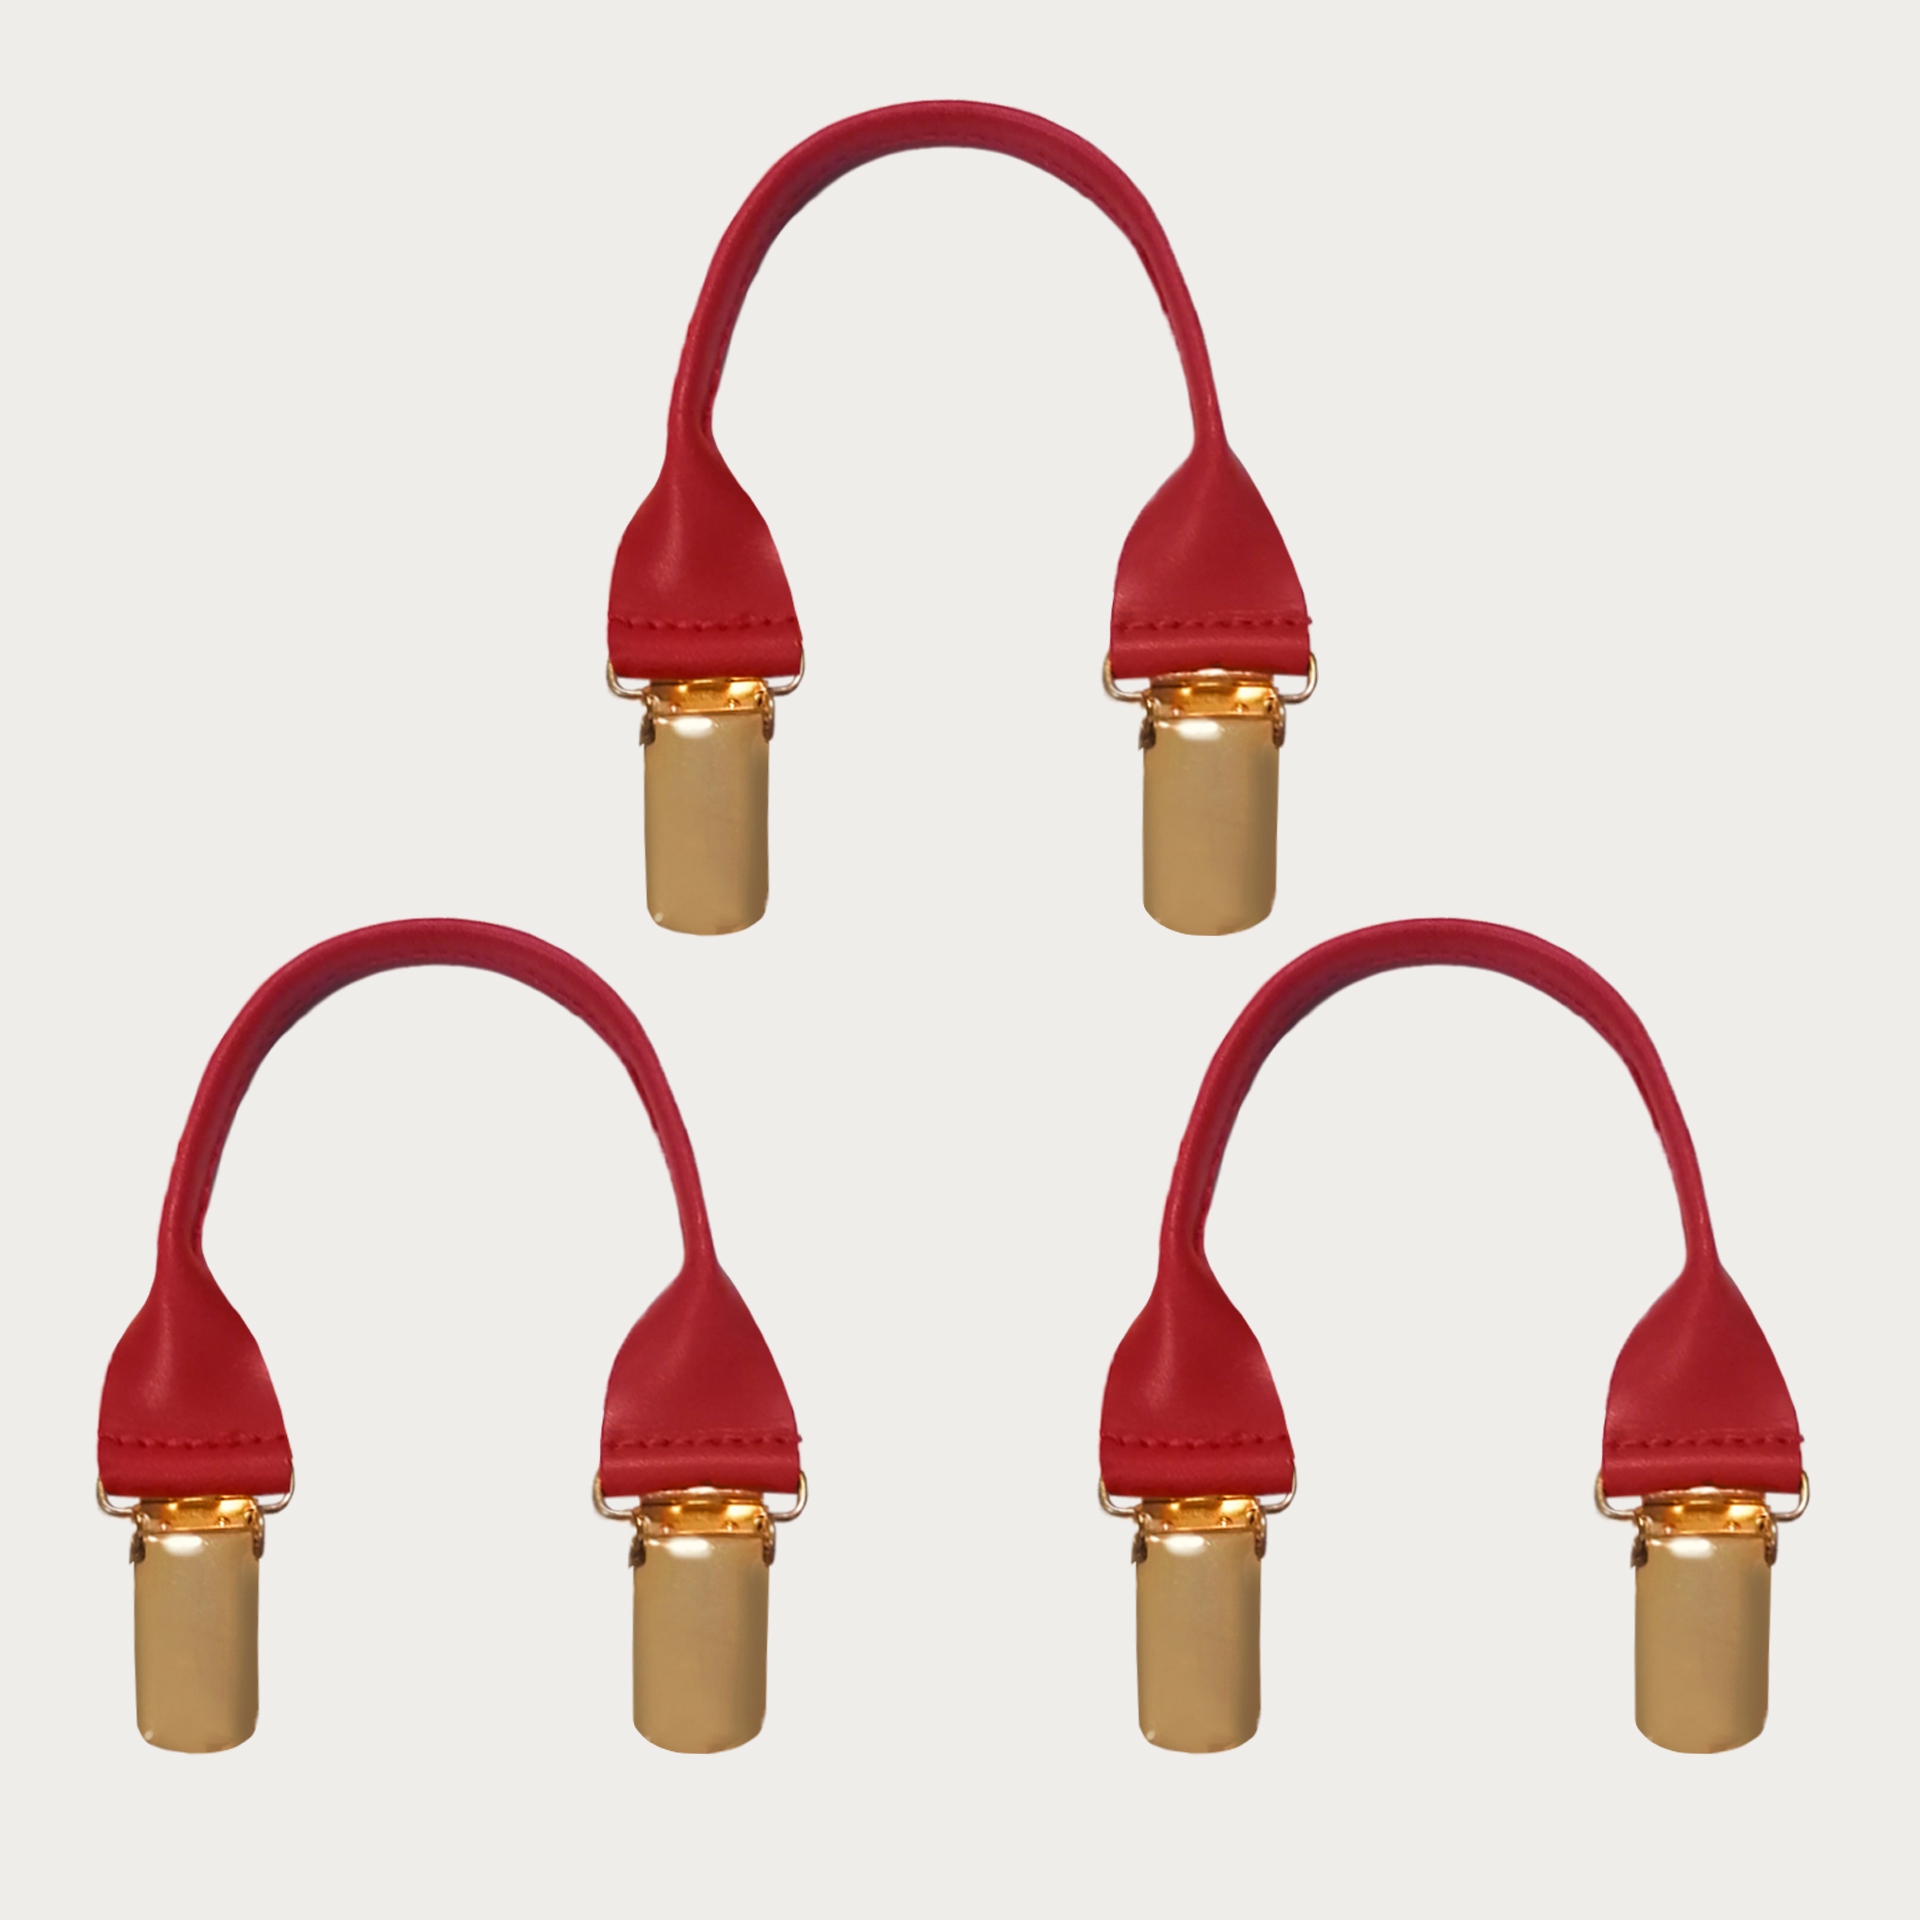 BRUCLE Leather connectors with golden clips, 3 pcs., red